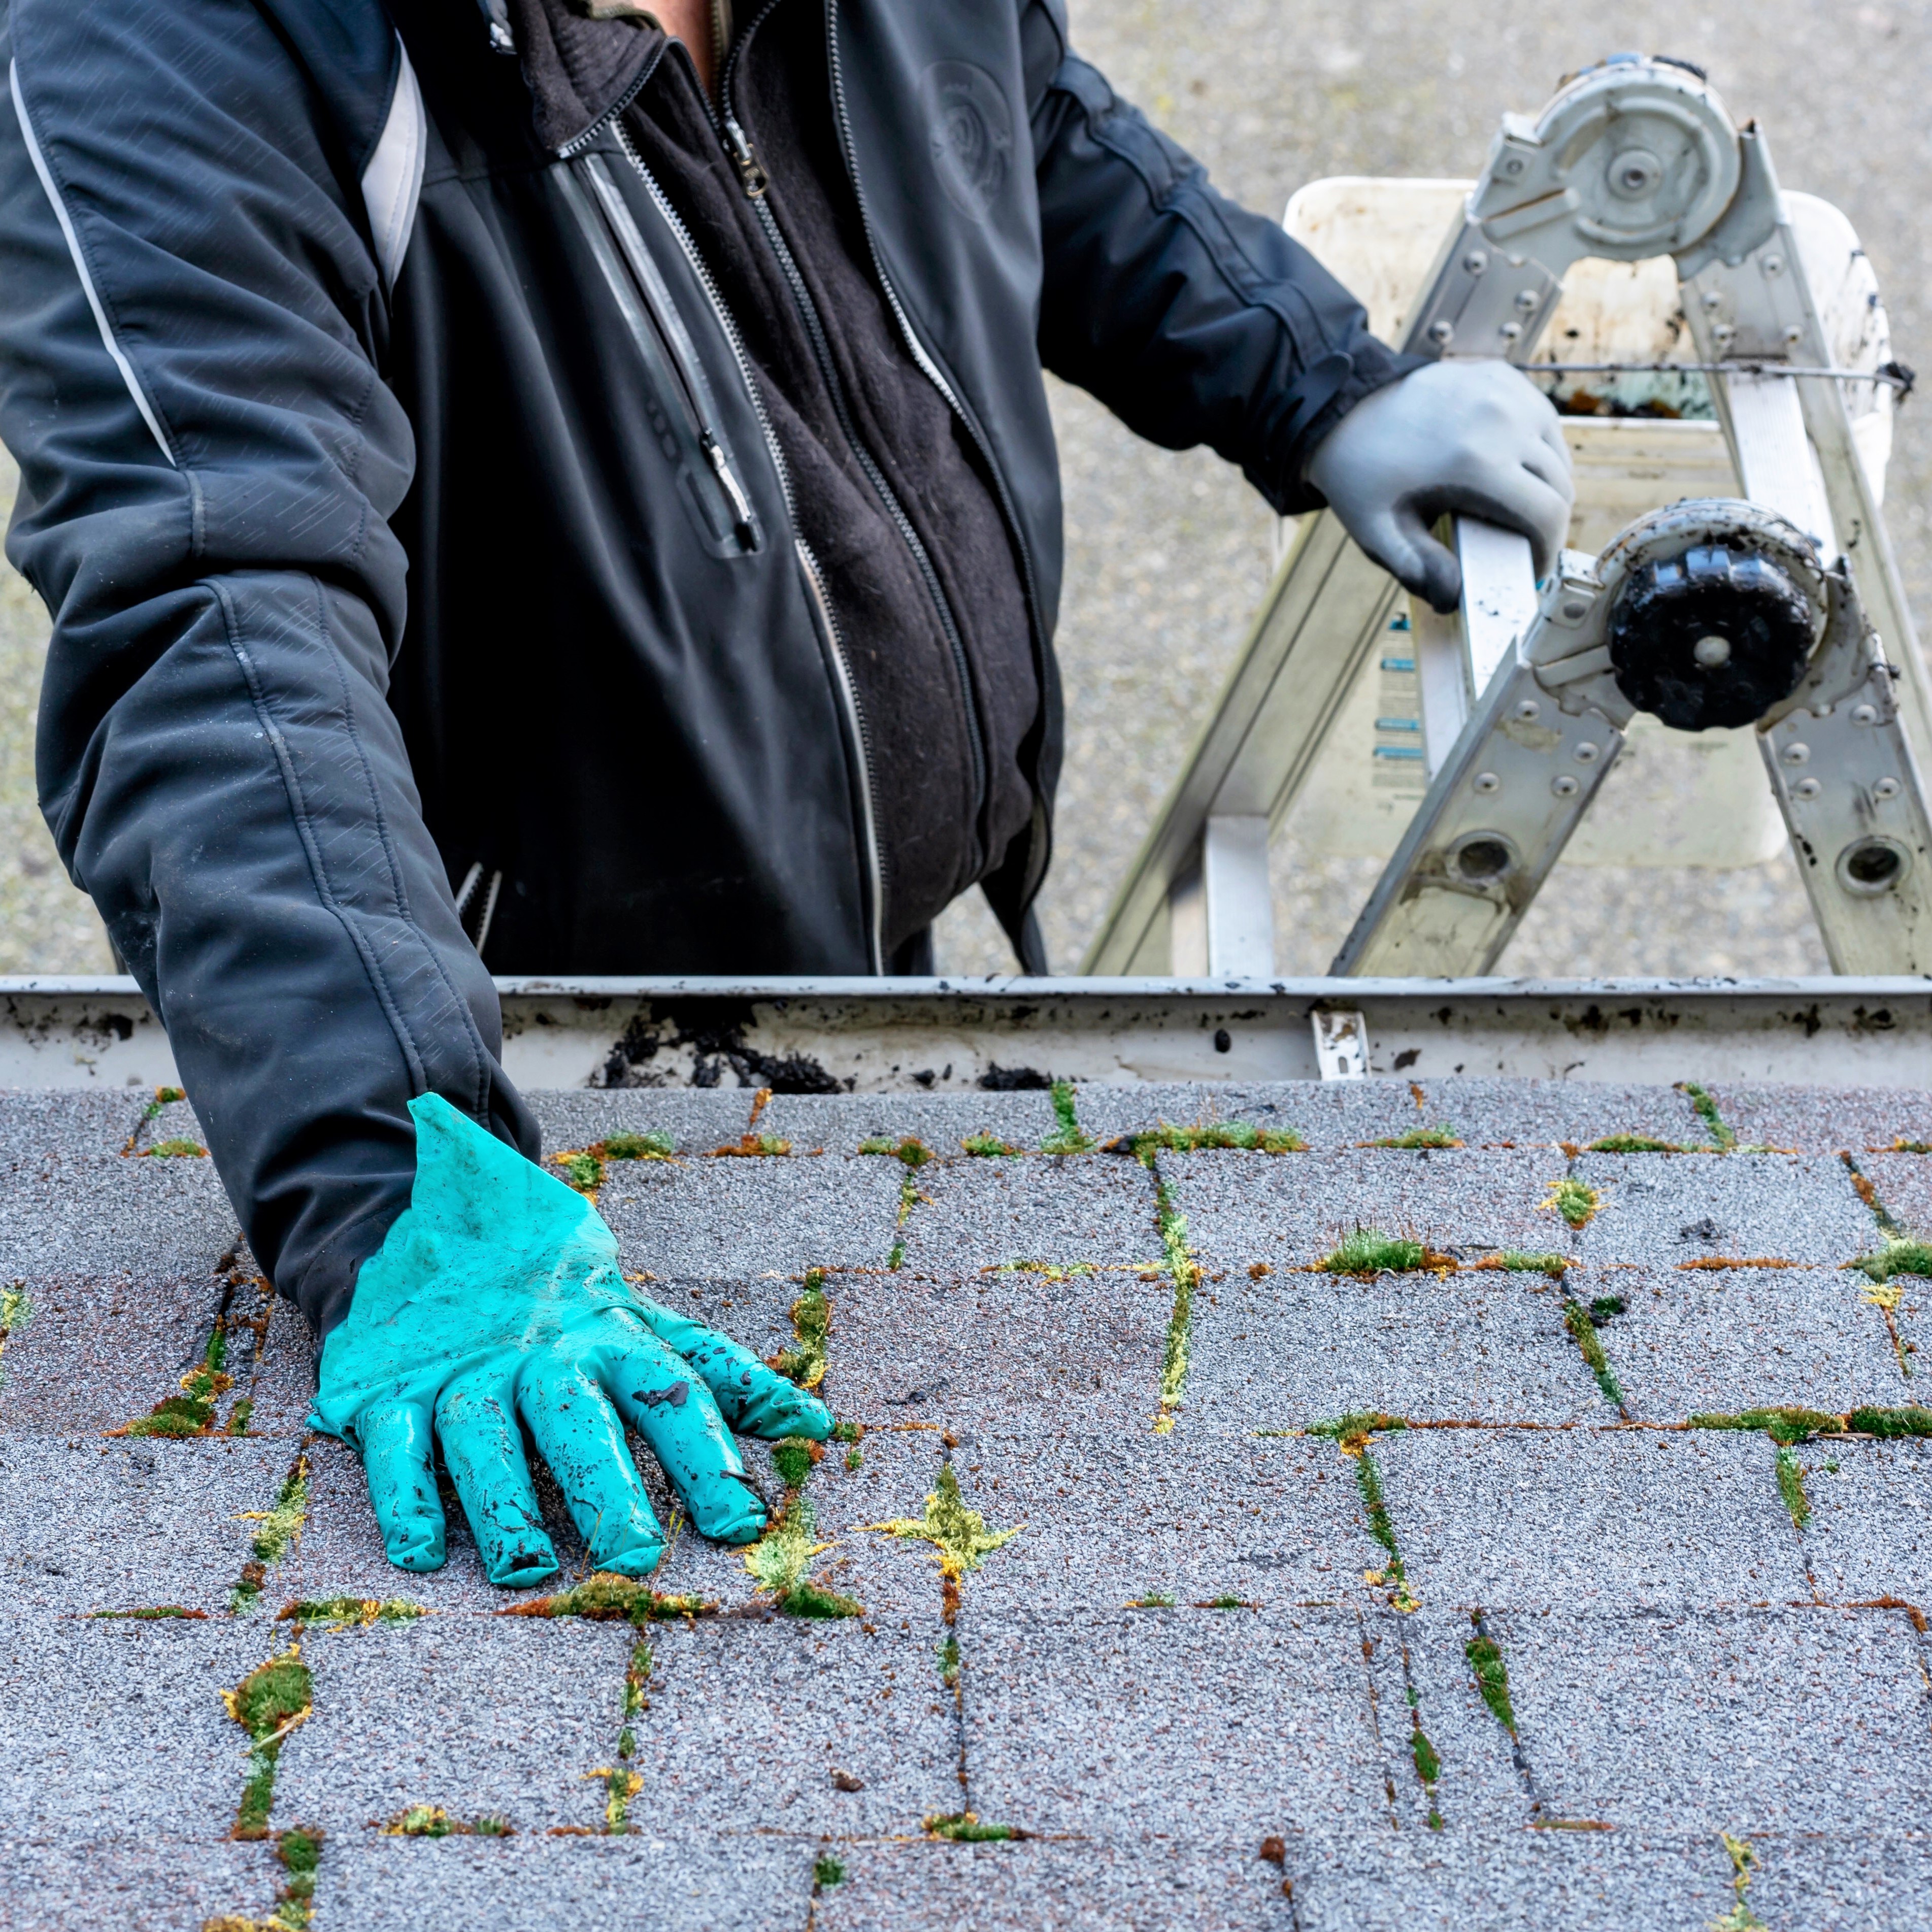 Home inspector standing on a ladder, hand in blue (personal) protective gloves touching rooftop, wearing a black jacket. Face hidden from the camera frame.